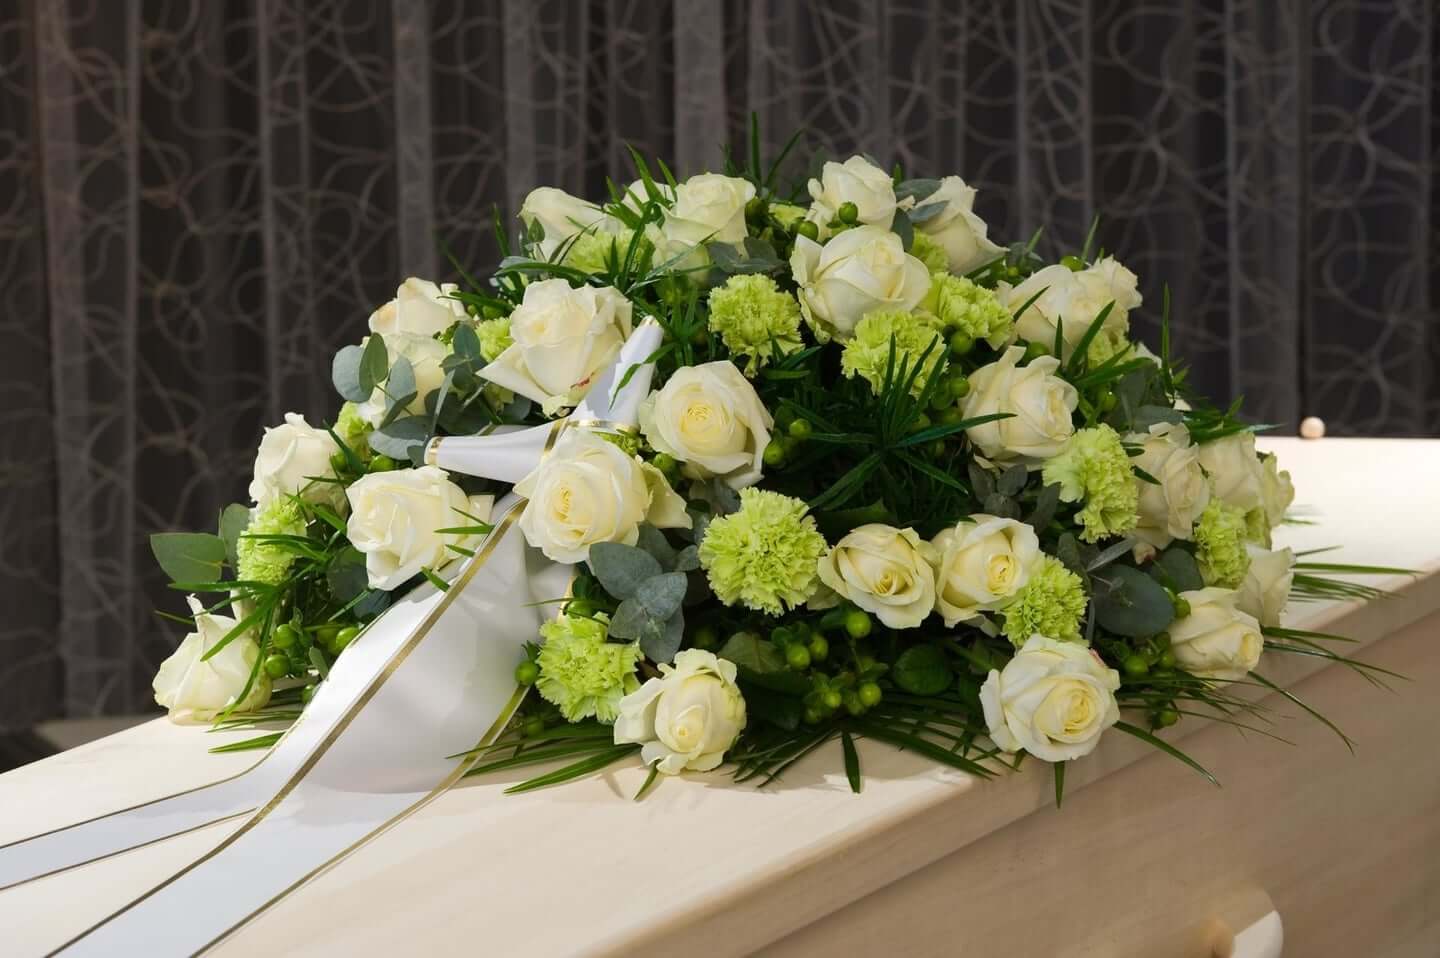 Funeral Flowers Bournemouth Poole Christchurch Dorset - Weldon Funeral Services